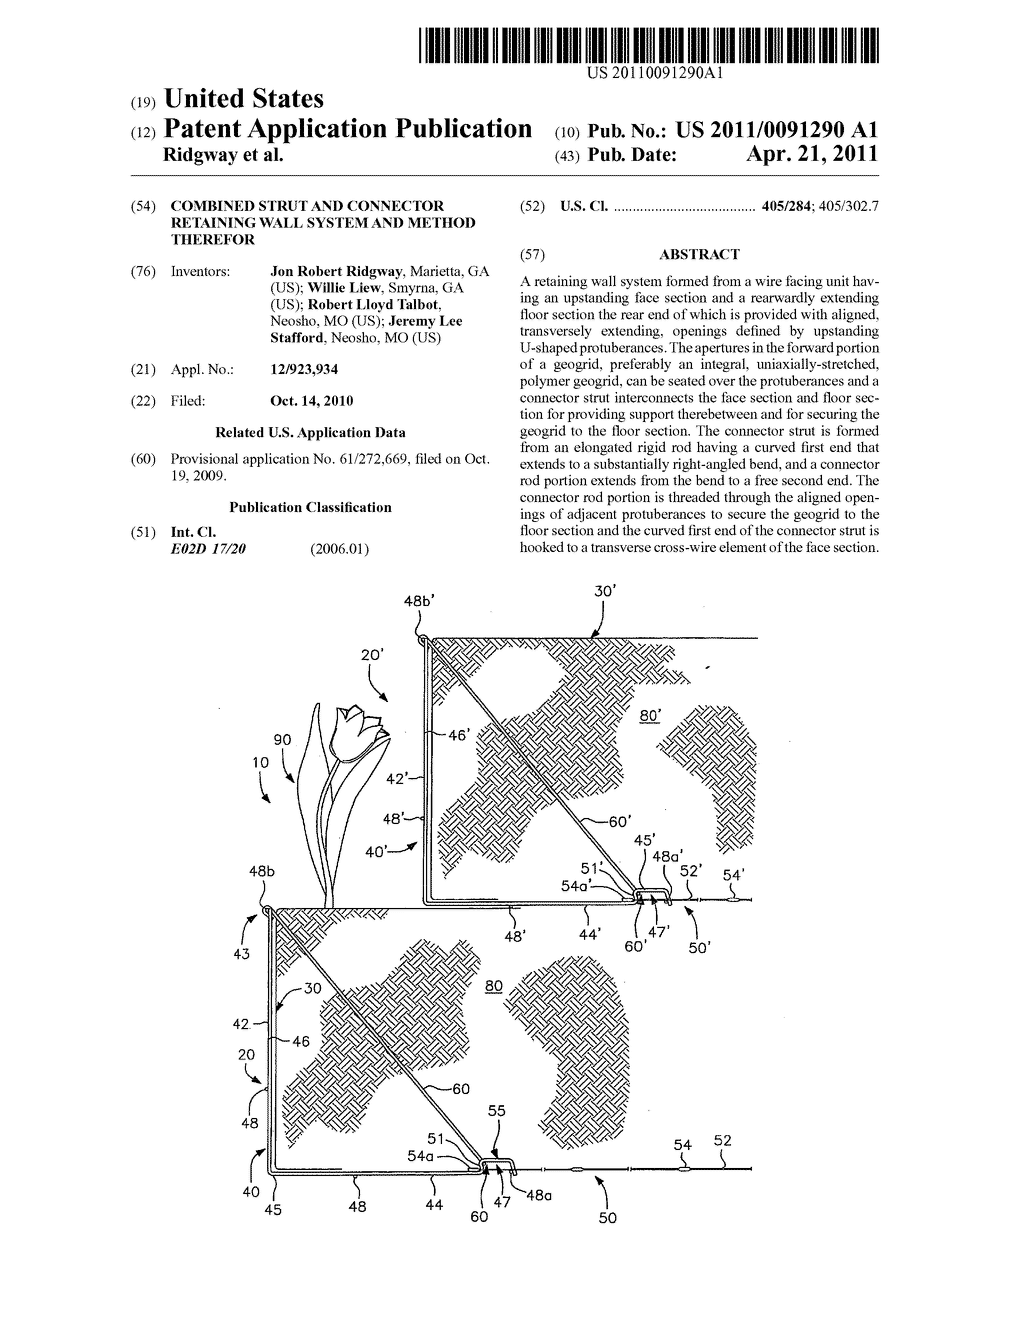 Combined strut and connector retaining wall system and method therefor - diagram, schematic, and image 01